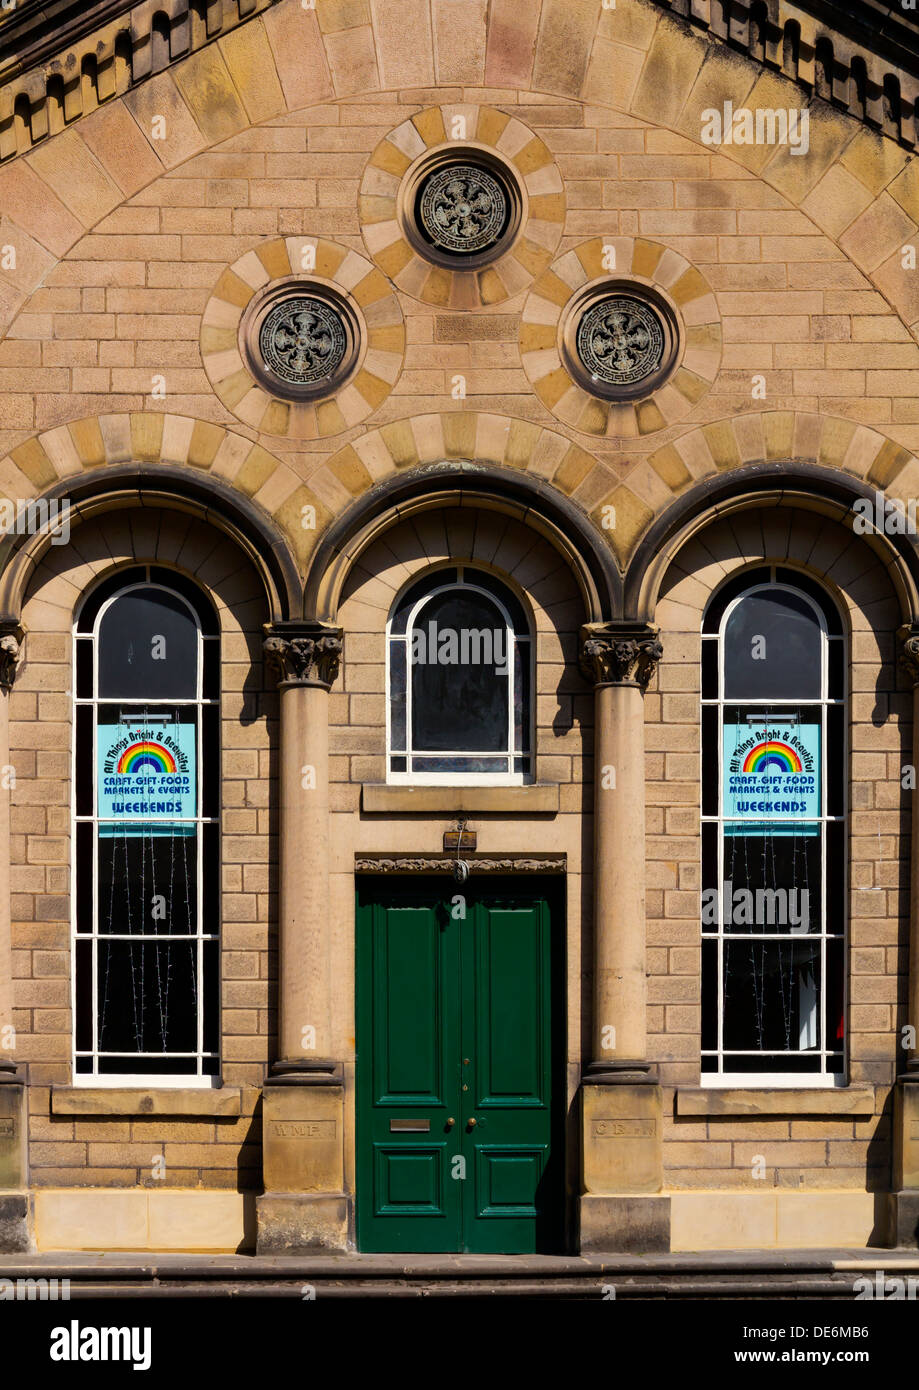 Detail of doors and windows on old methodist church used for craft fairs in Matlock Bath Derbyshire Peak District, England, UK Stock Photo